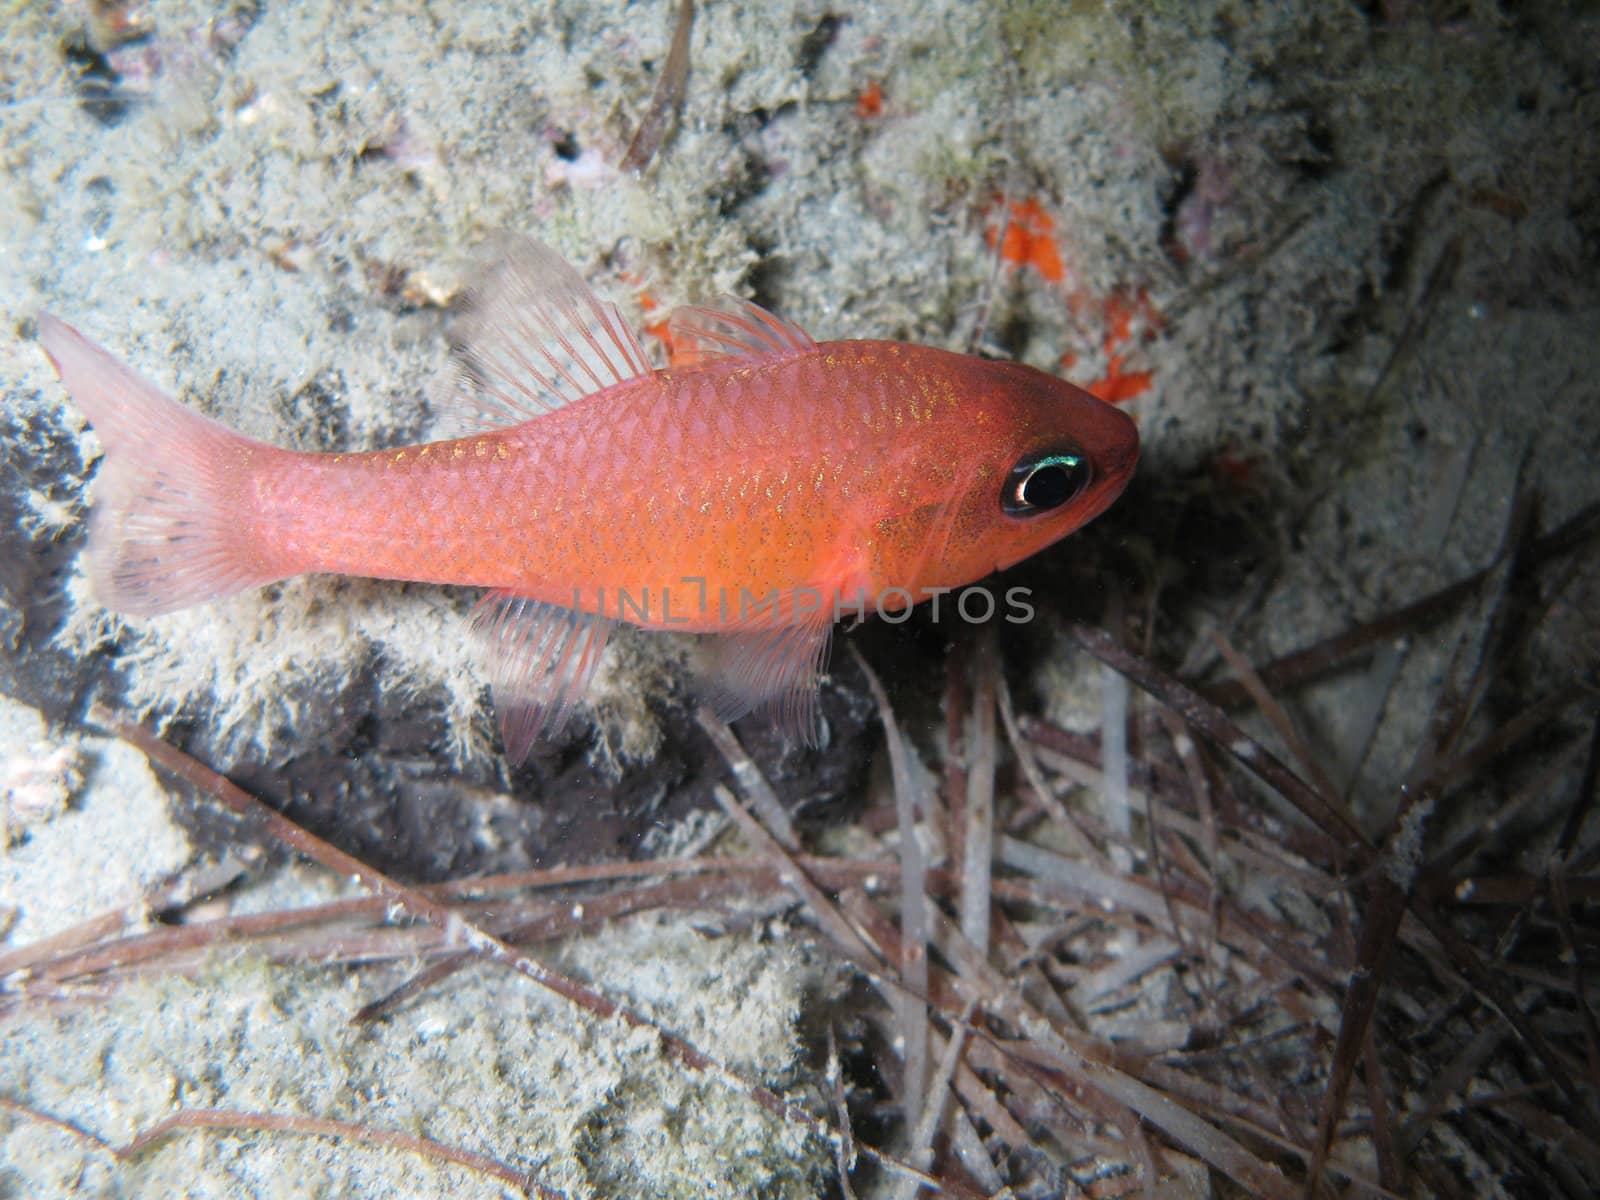 "Apogon Imberbis" fish. Shotted in the wild nighttime.